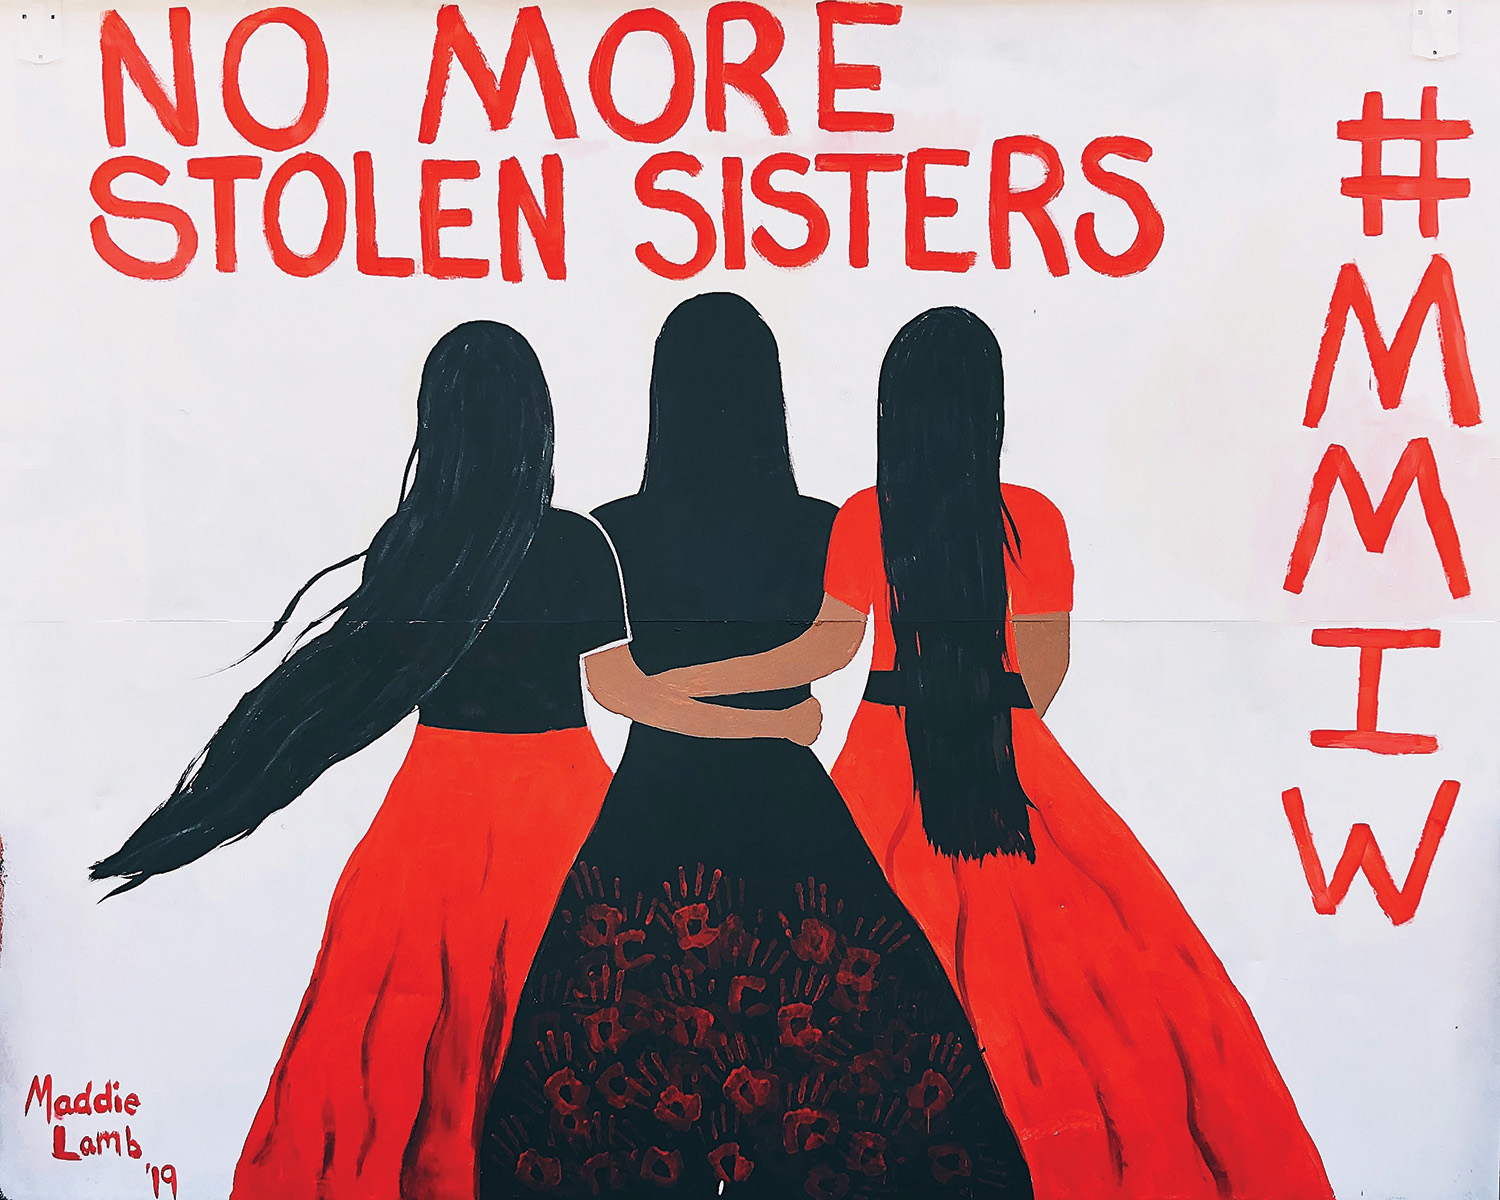 Instagram account for Missing and Murdered Indigenous Women and Girls